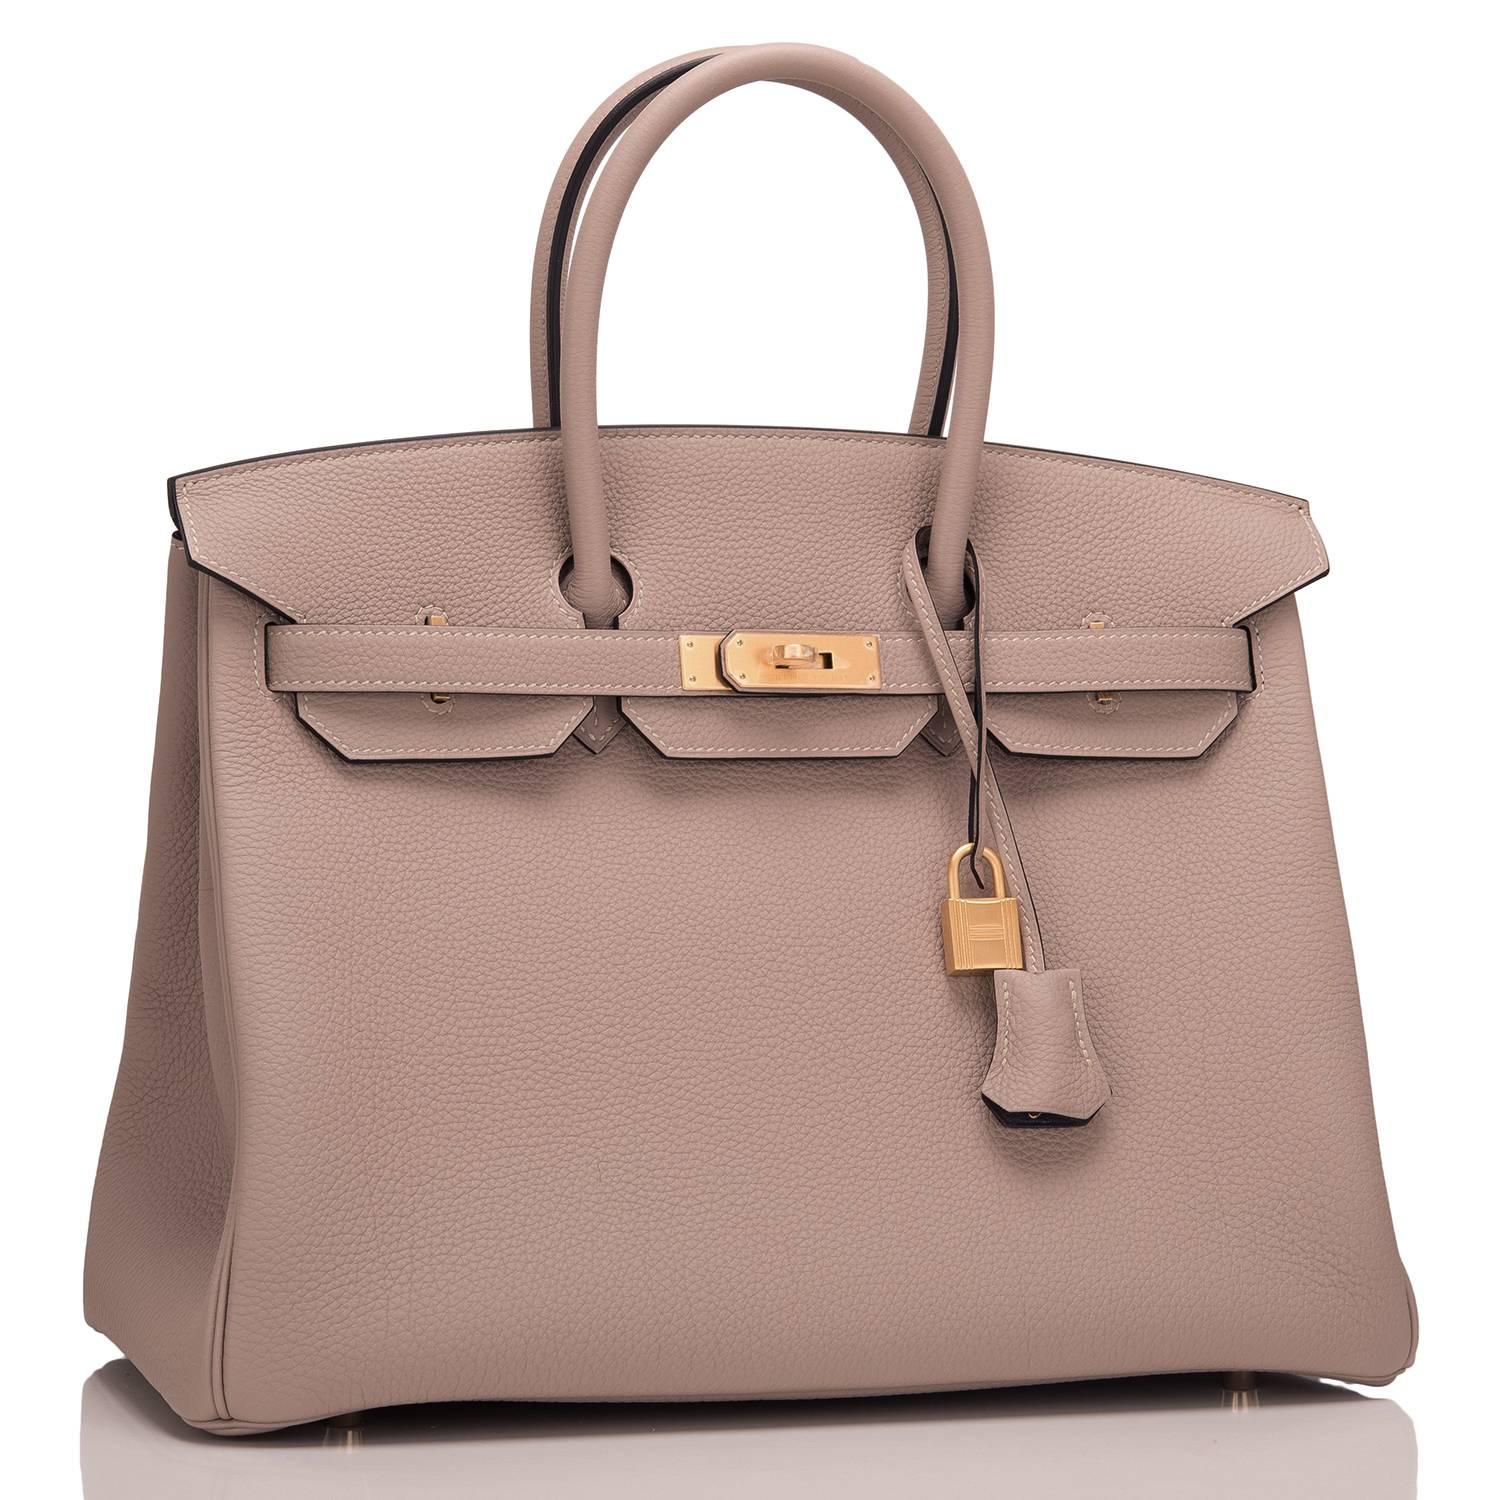 Hermes special order, horseshoe stamped (HSS) bi-color Birkin 35cm of Gris Tourterelle togo leather with Ardroise lining and brushed gold hardware.

This Birkin has tonal stitching, a front toggle closure, a clochette with lock and two keys, and